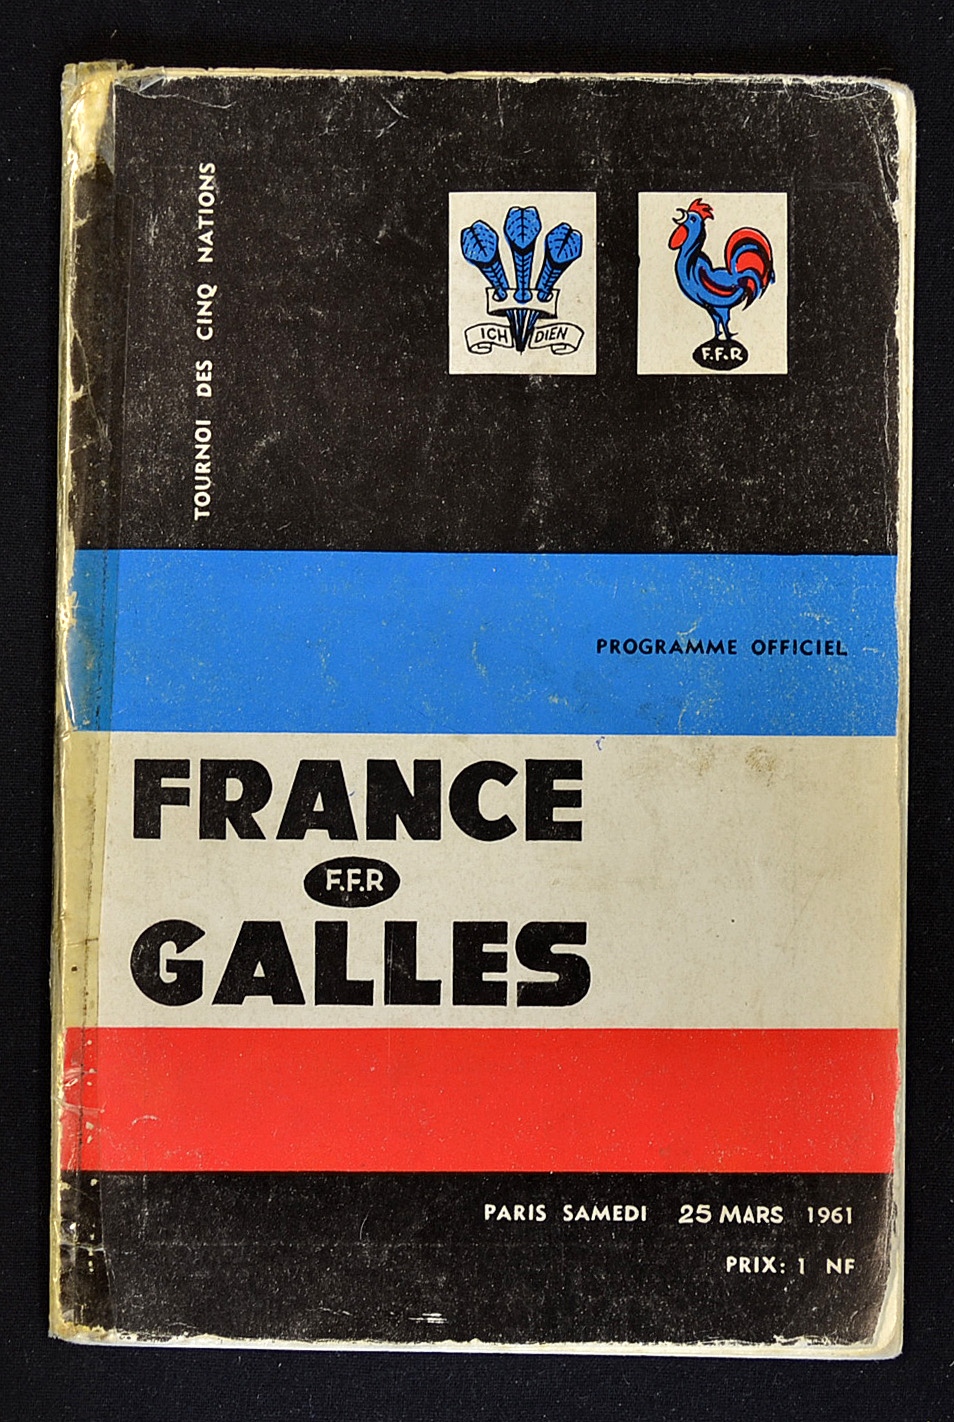 1961 France v Wales signed rugby programme - played on March 25 in Paris signed by 14 members of the - Image 2 of 3